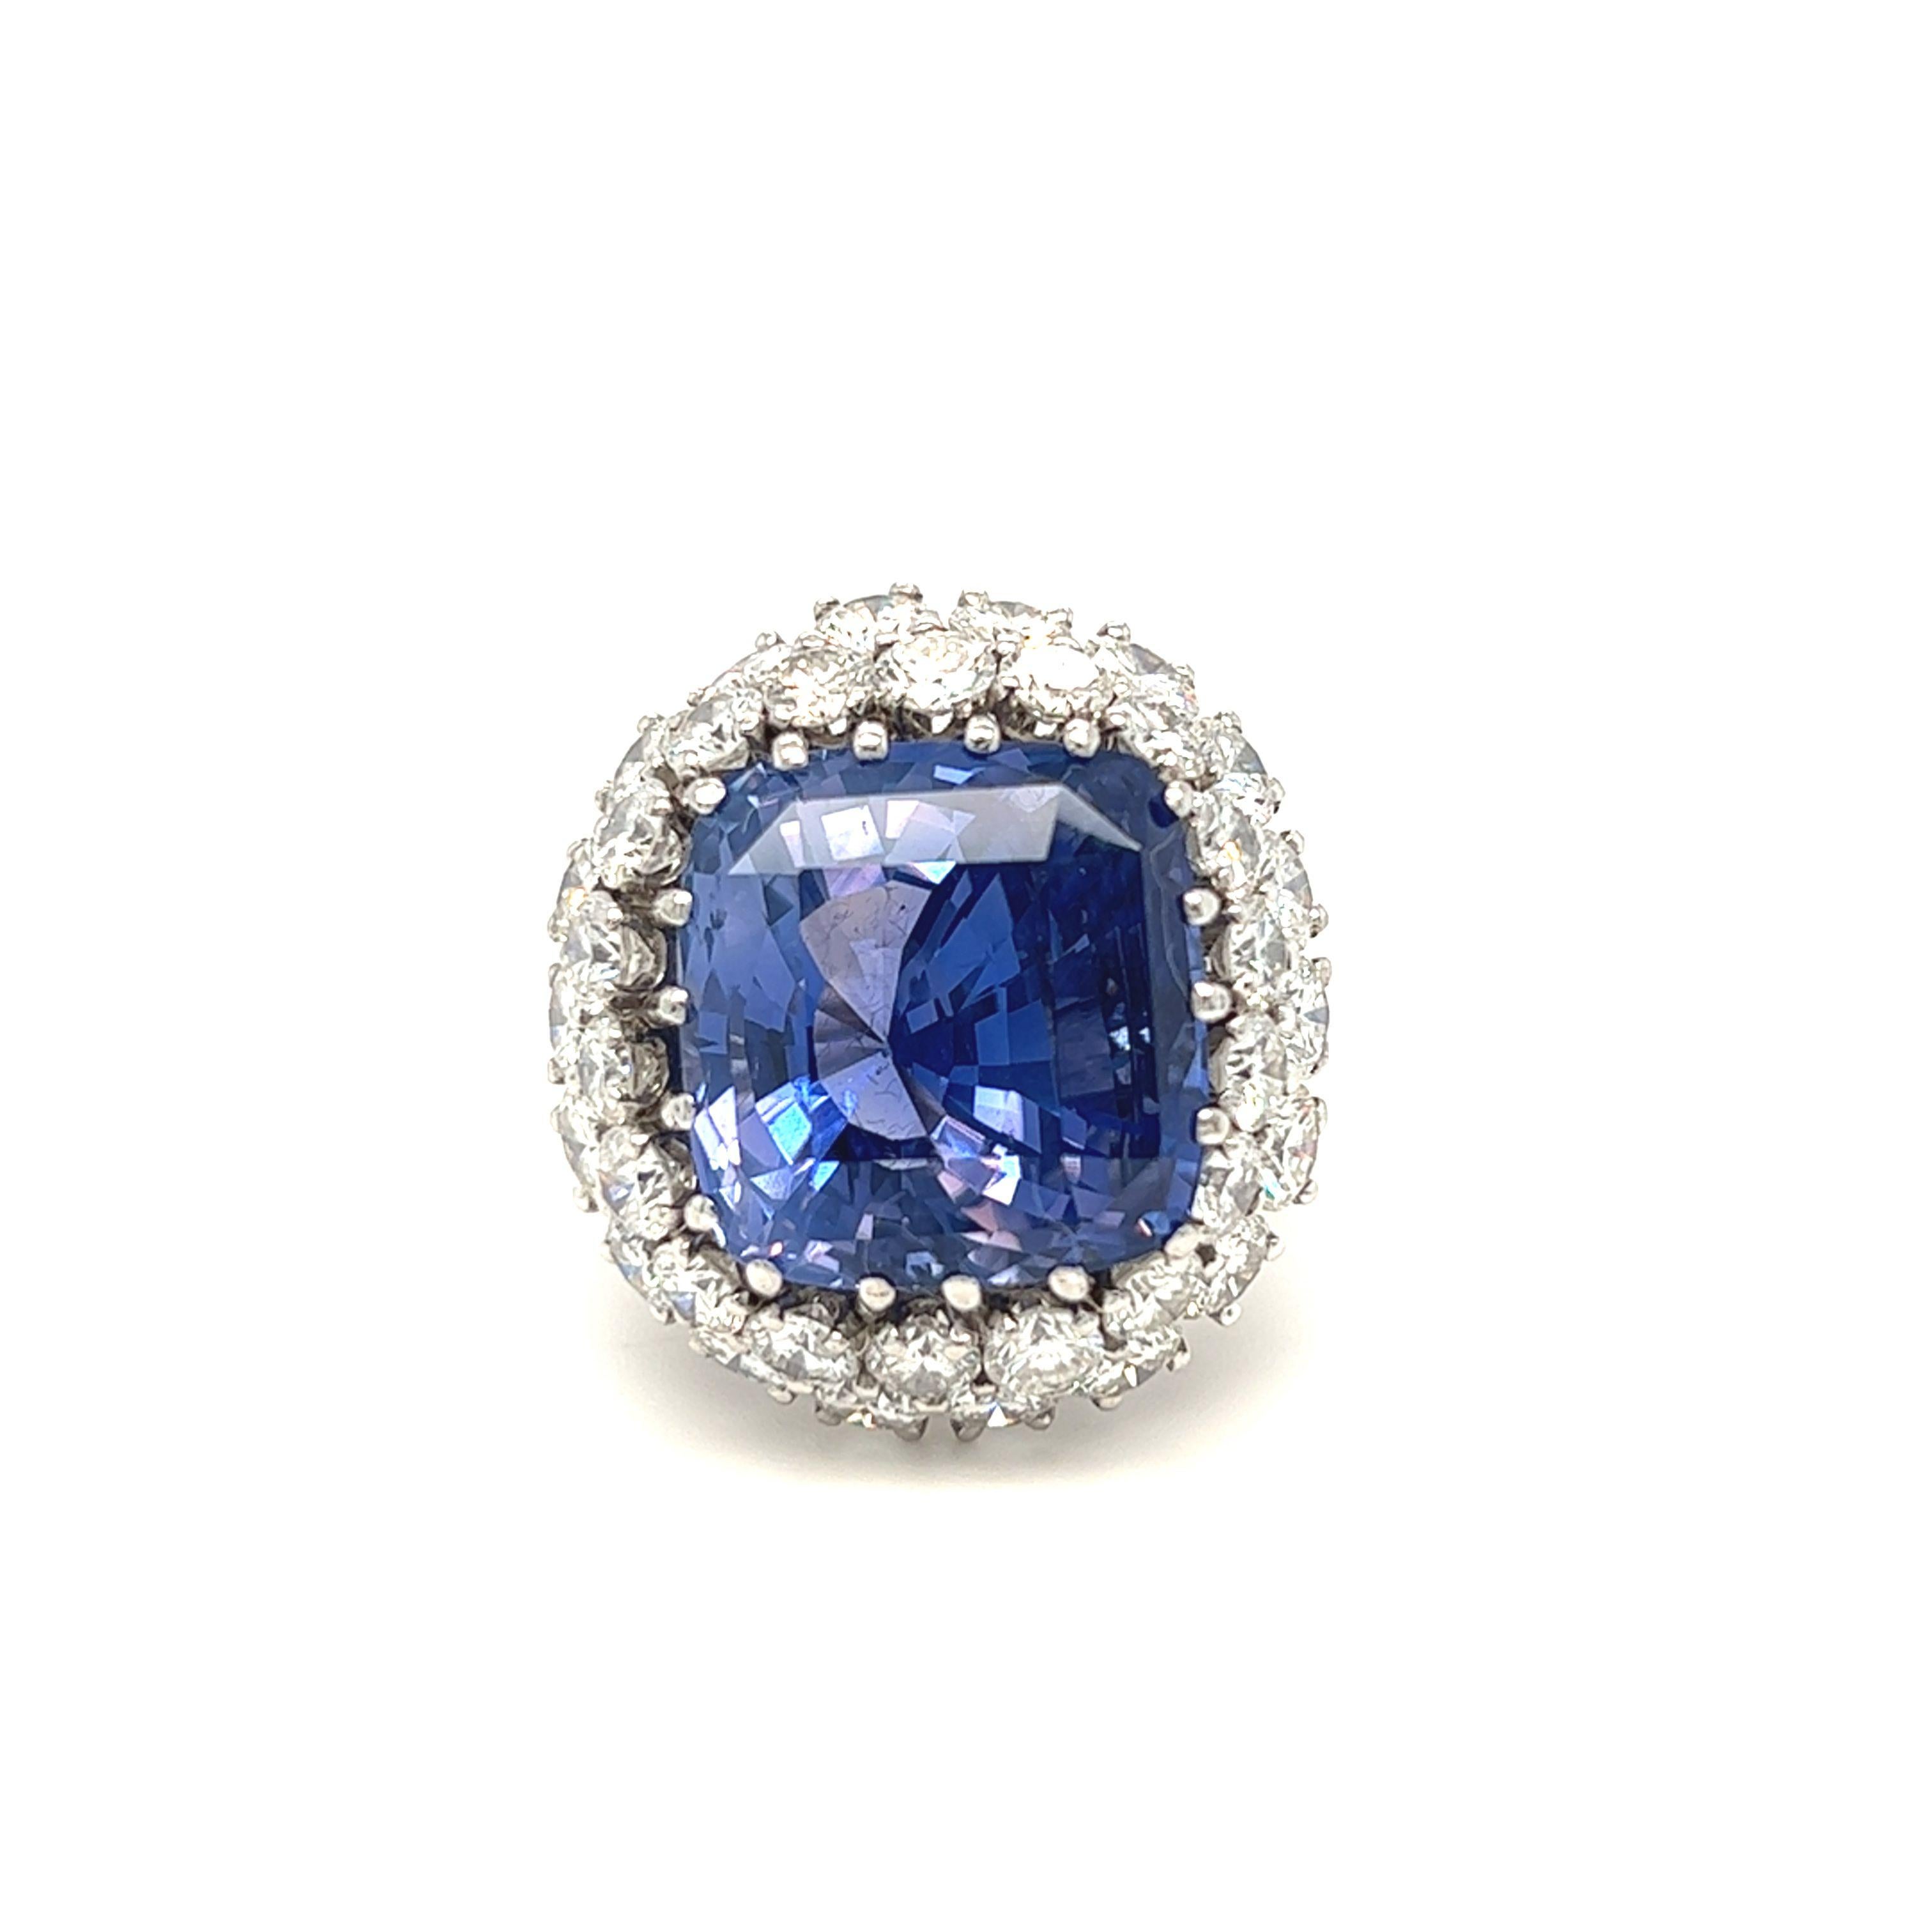 Cushion Cut GIA Certified 24.18 Carat Unheated Color Change Sapphire and Diamond Ring For Sale